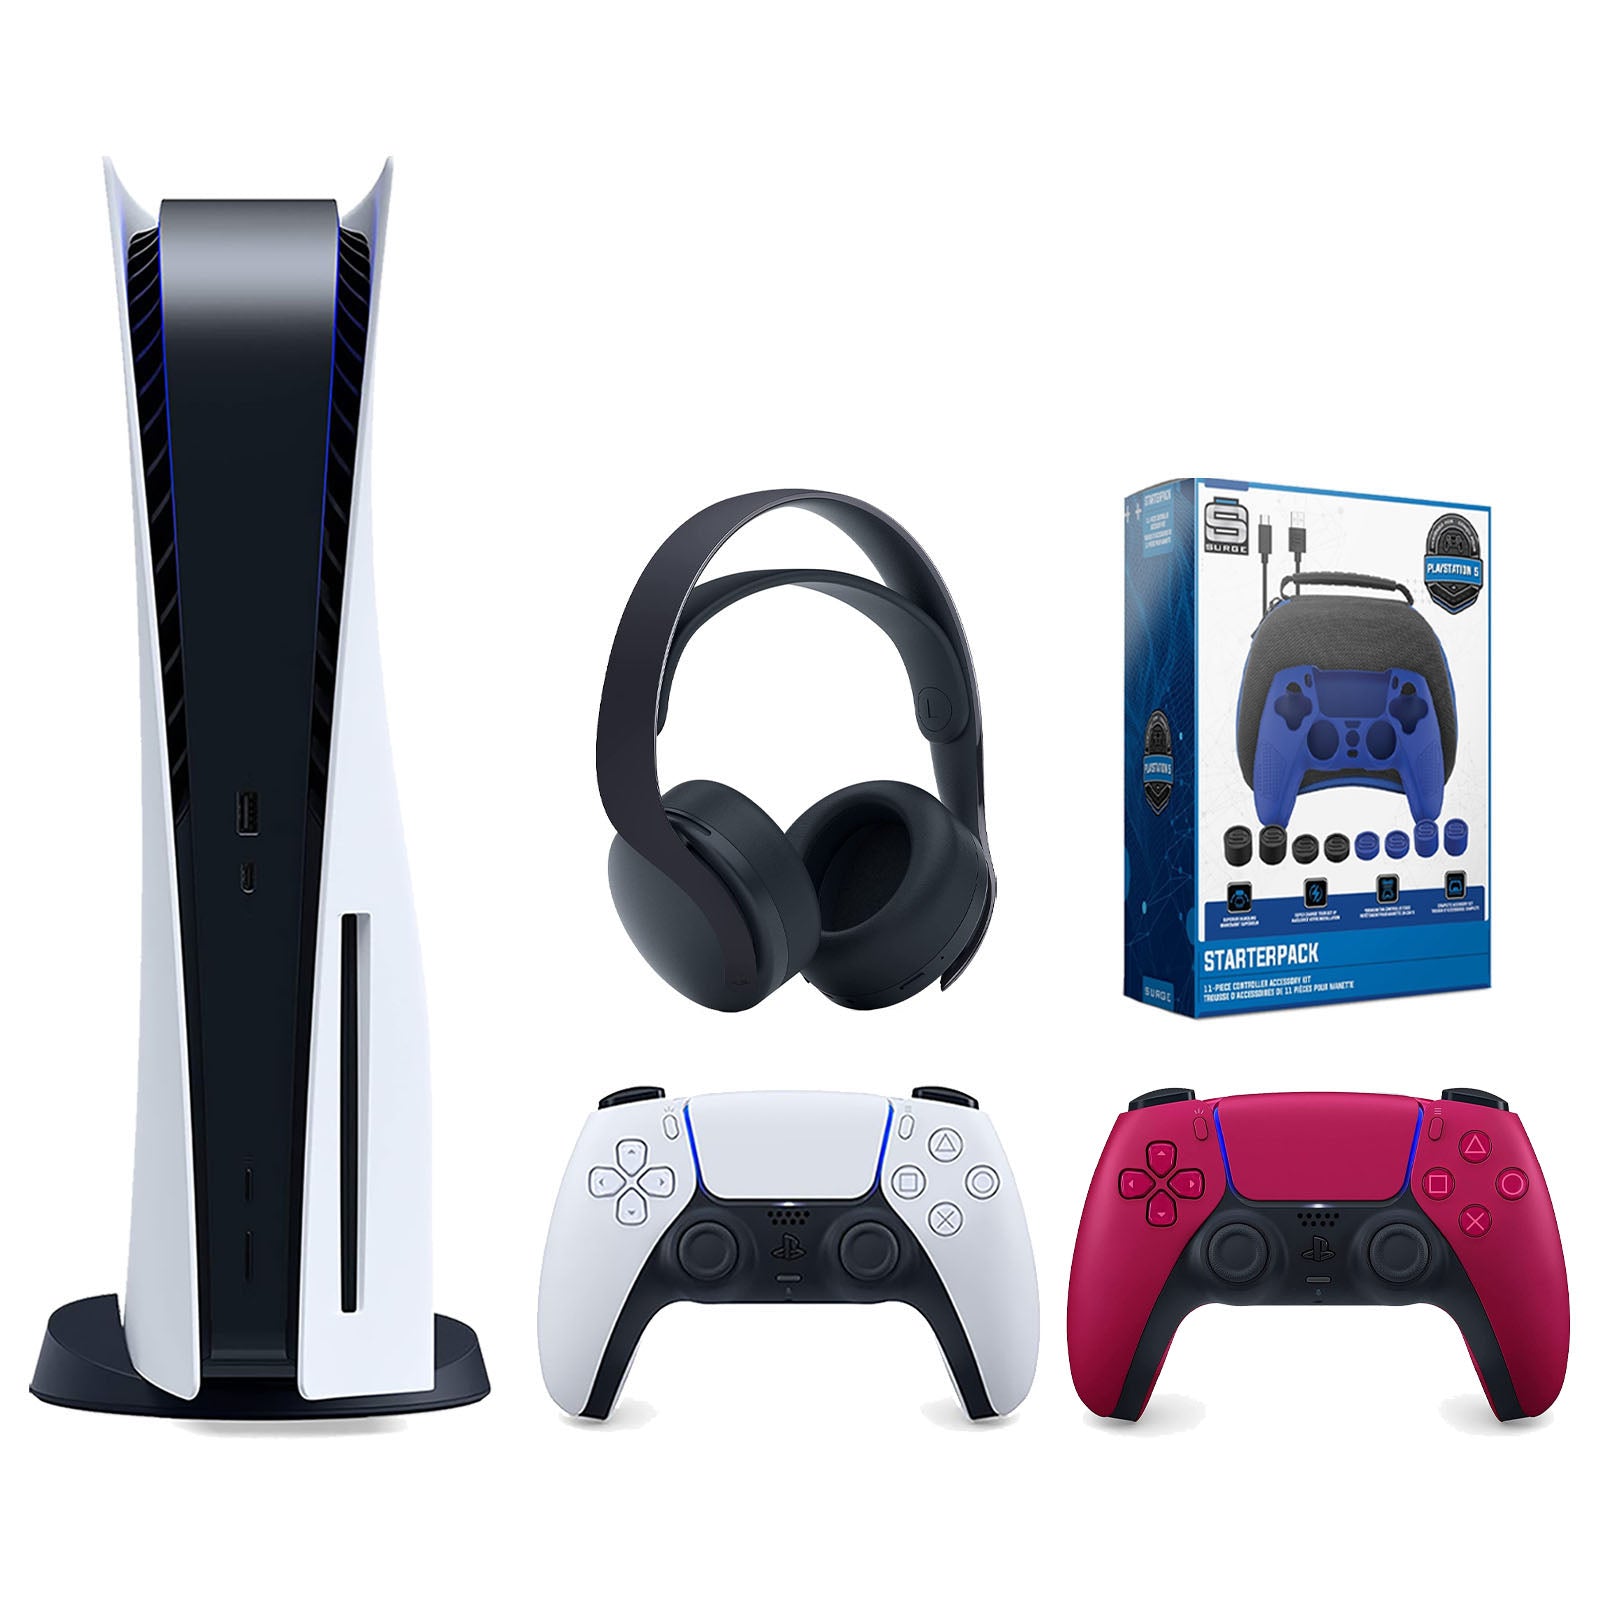 Sony Playstation 5 Disc Version Console with Extra Red Controller, Black PULSE 3D Headset and Surge Pro Gamer Starter Pack 11-Piece Accessory Bundle - Pro-Distributing